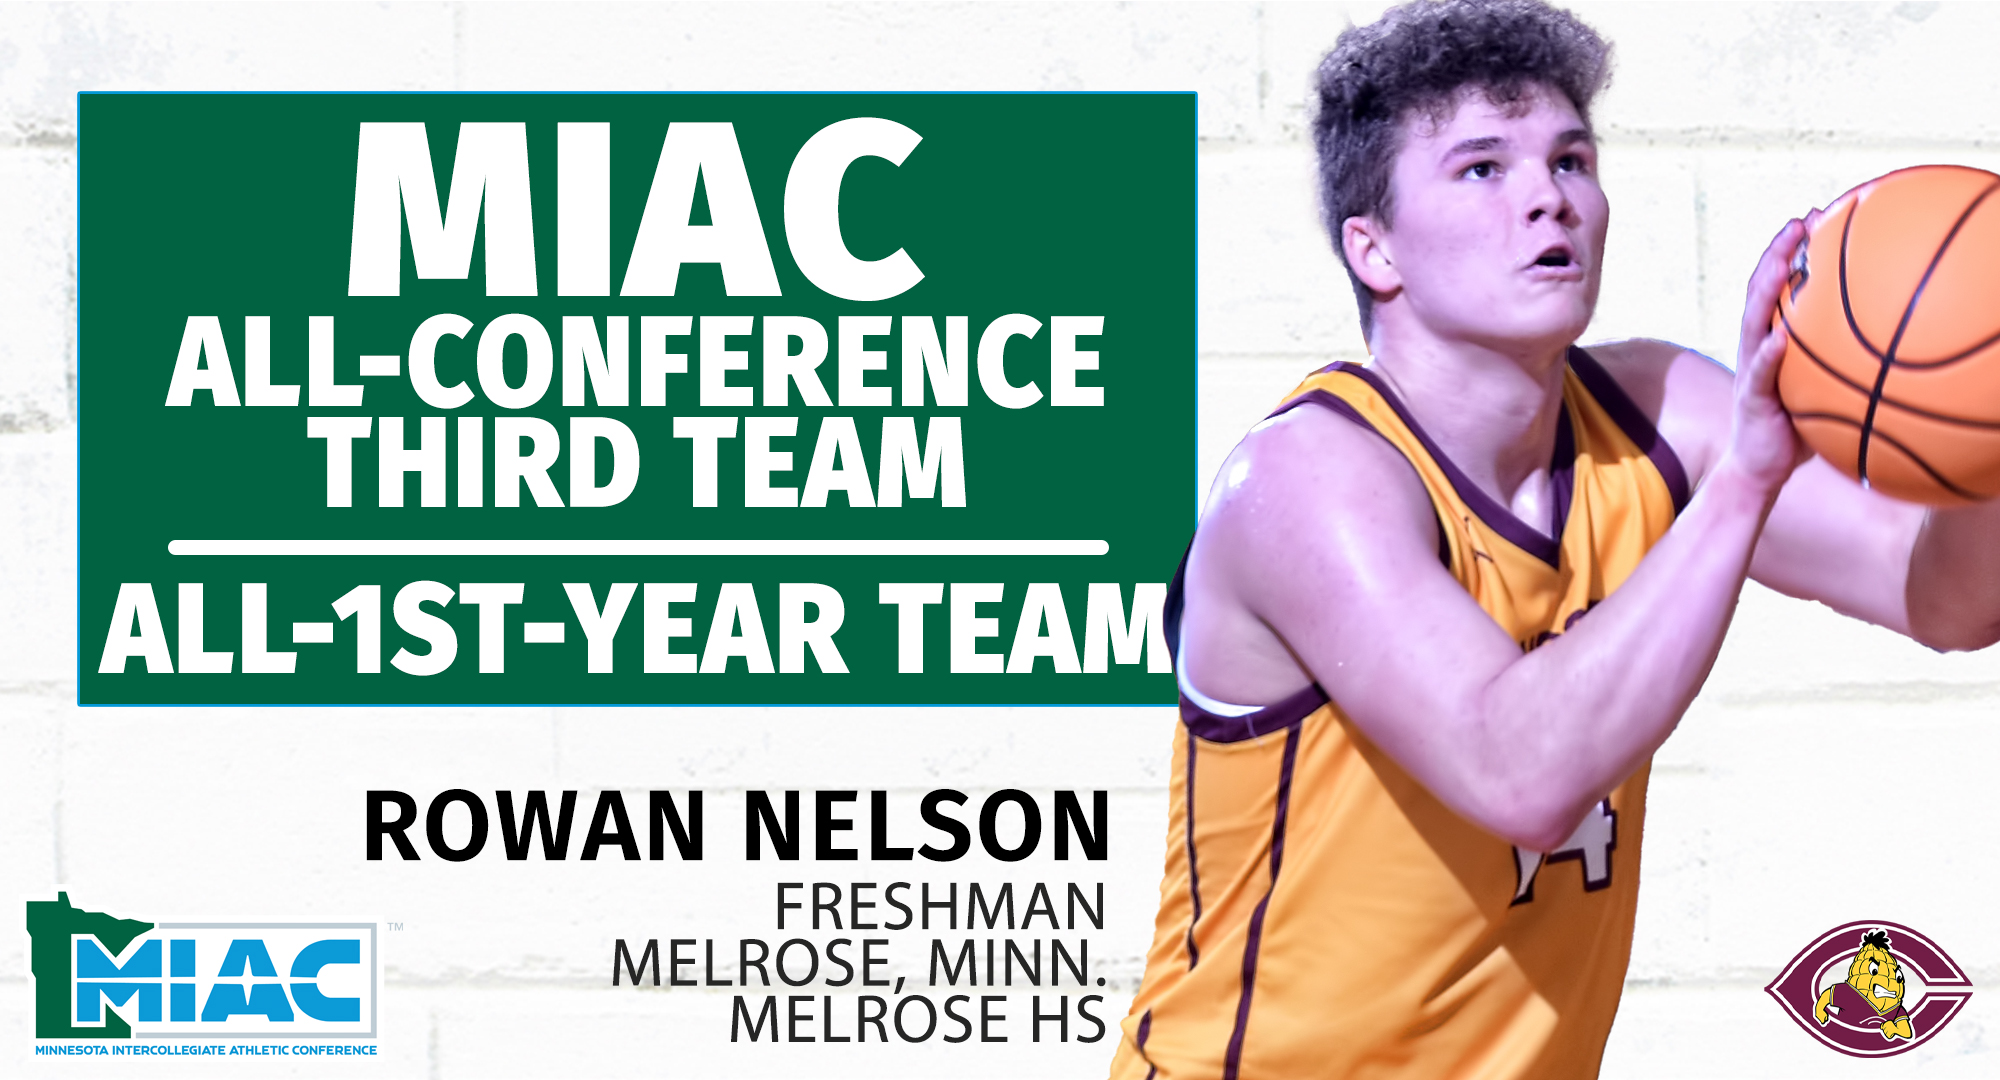 Rowan Nelson became the first player in Cobber history to receive MIAC All-Conference honors and be placed on the MIAC All-First-Year Team in the same year.